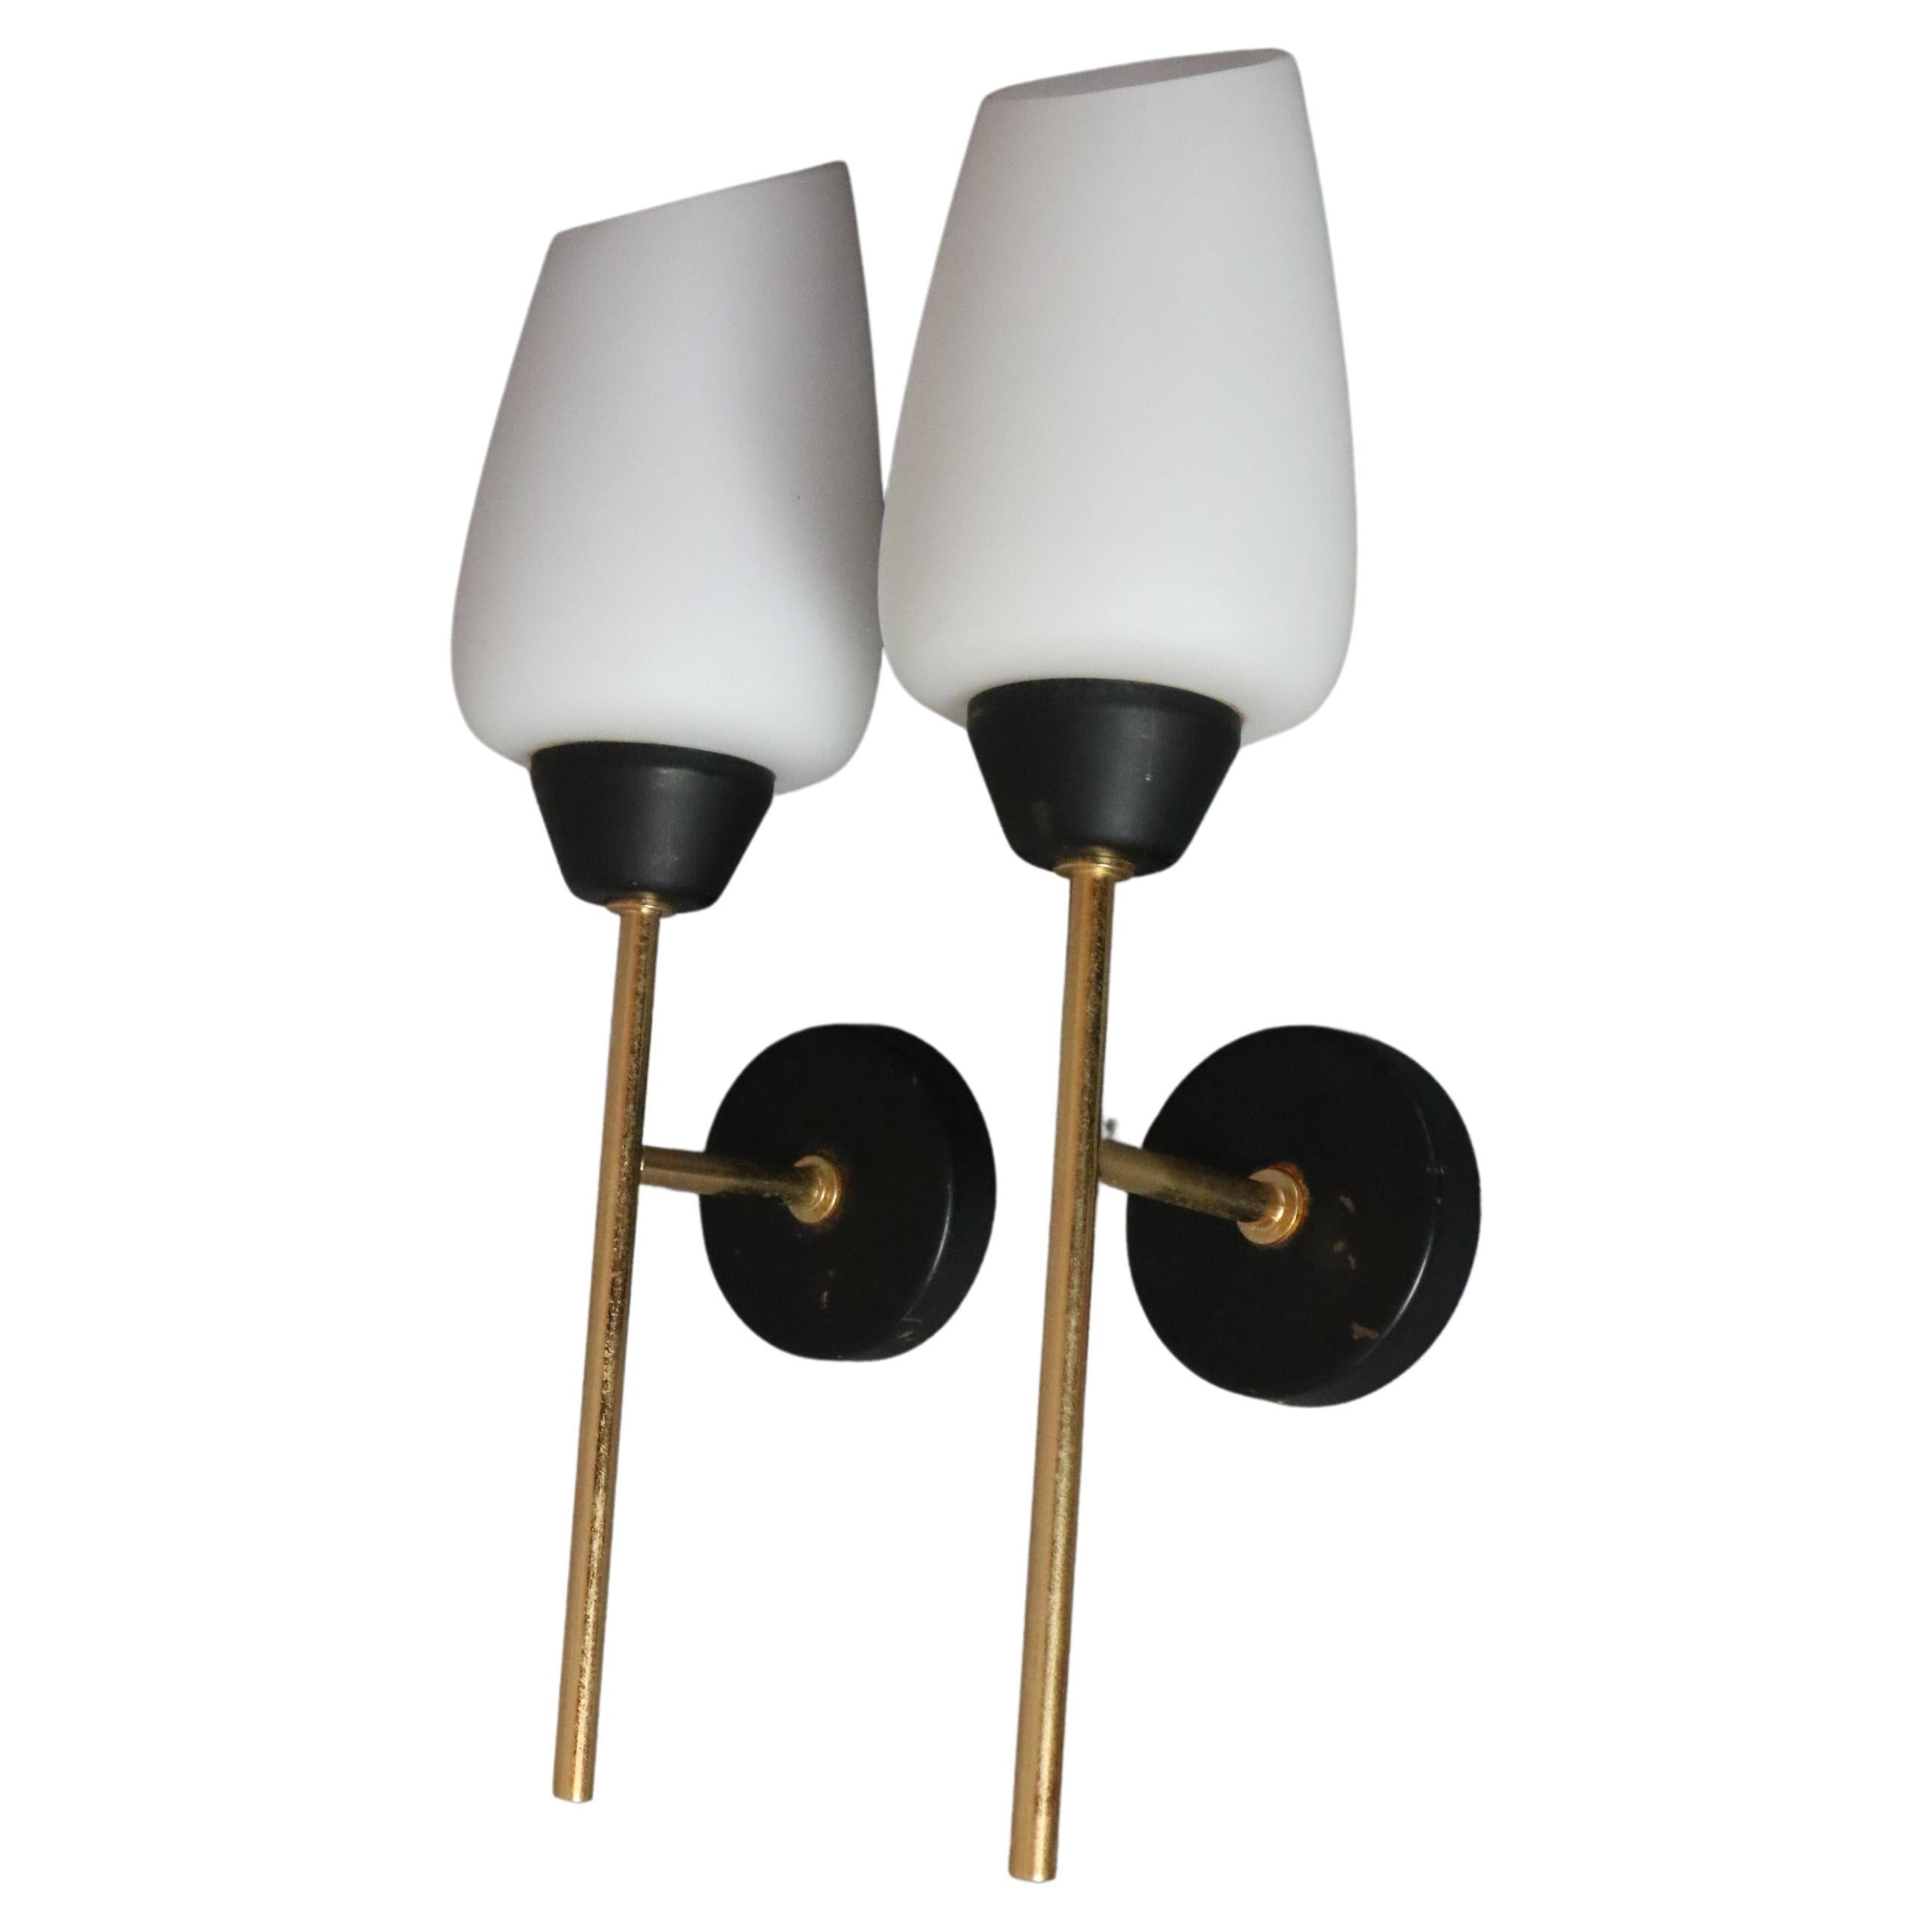 Maison Lunel - Pair of Mid-Century Modern Wall lights - 1950s France

Very nice pair of sconces in the 50's design. 
They are all in contrast: the luminous and milky whiteness of the opaline is opposed to the dark base of the blackened brass, the